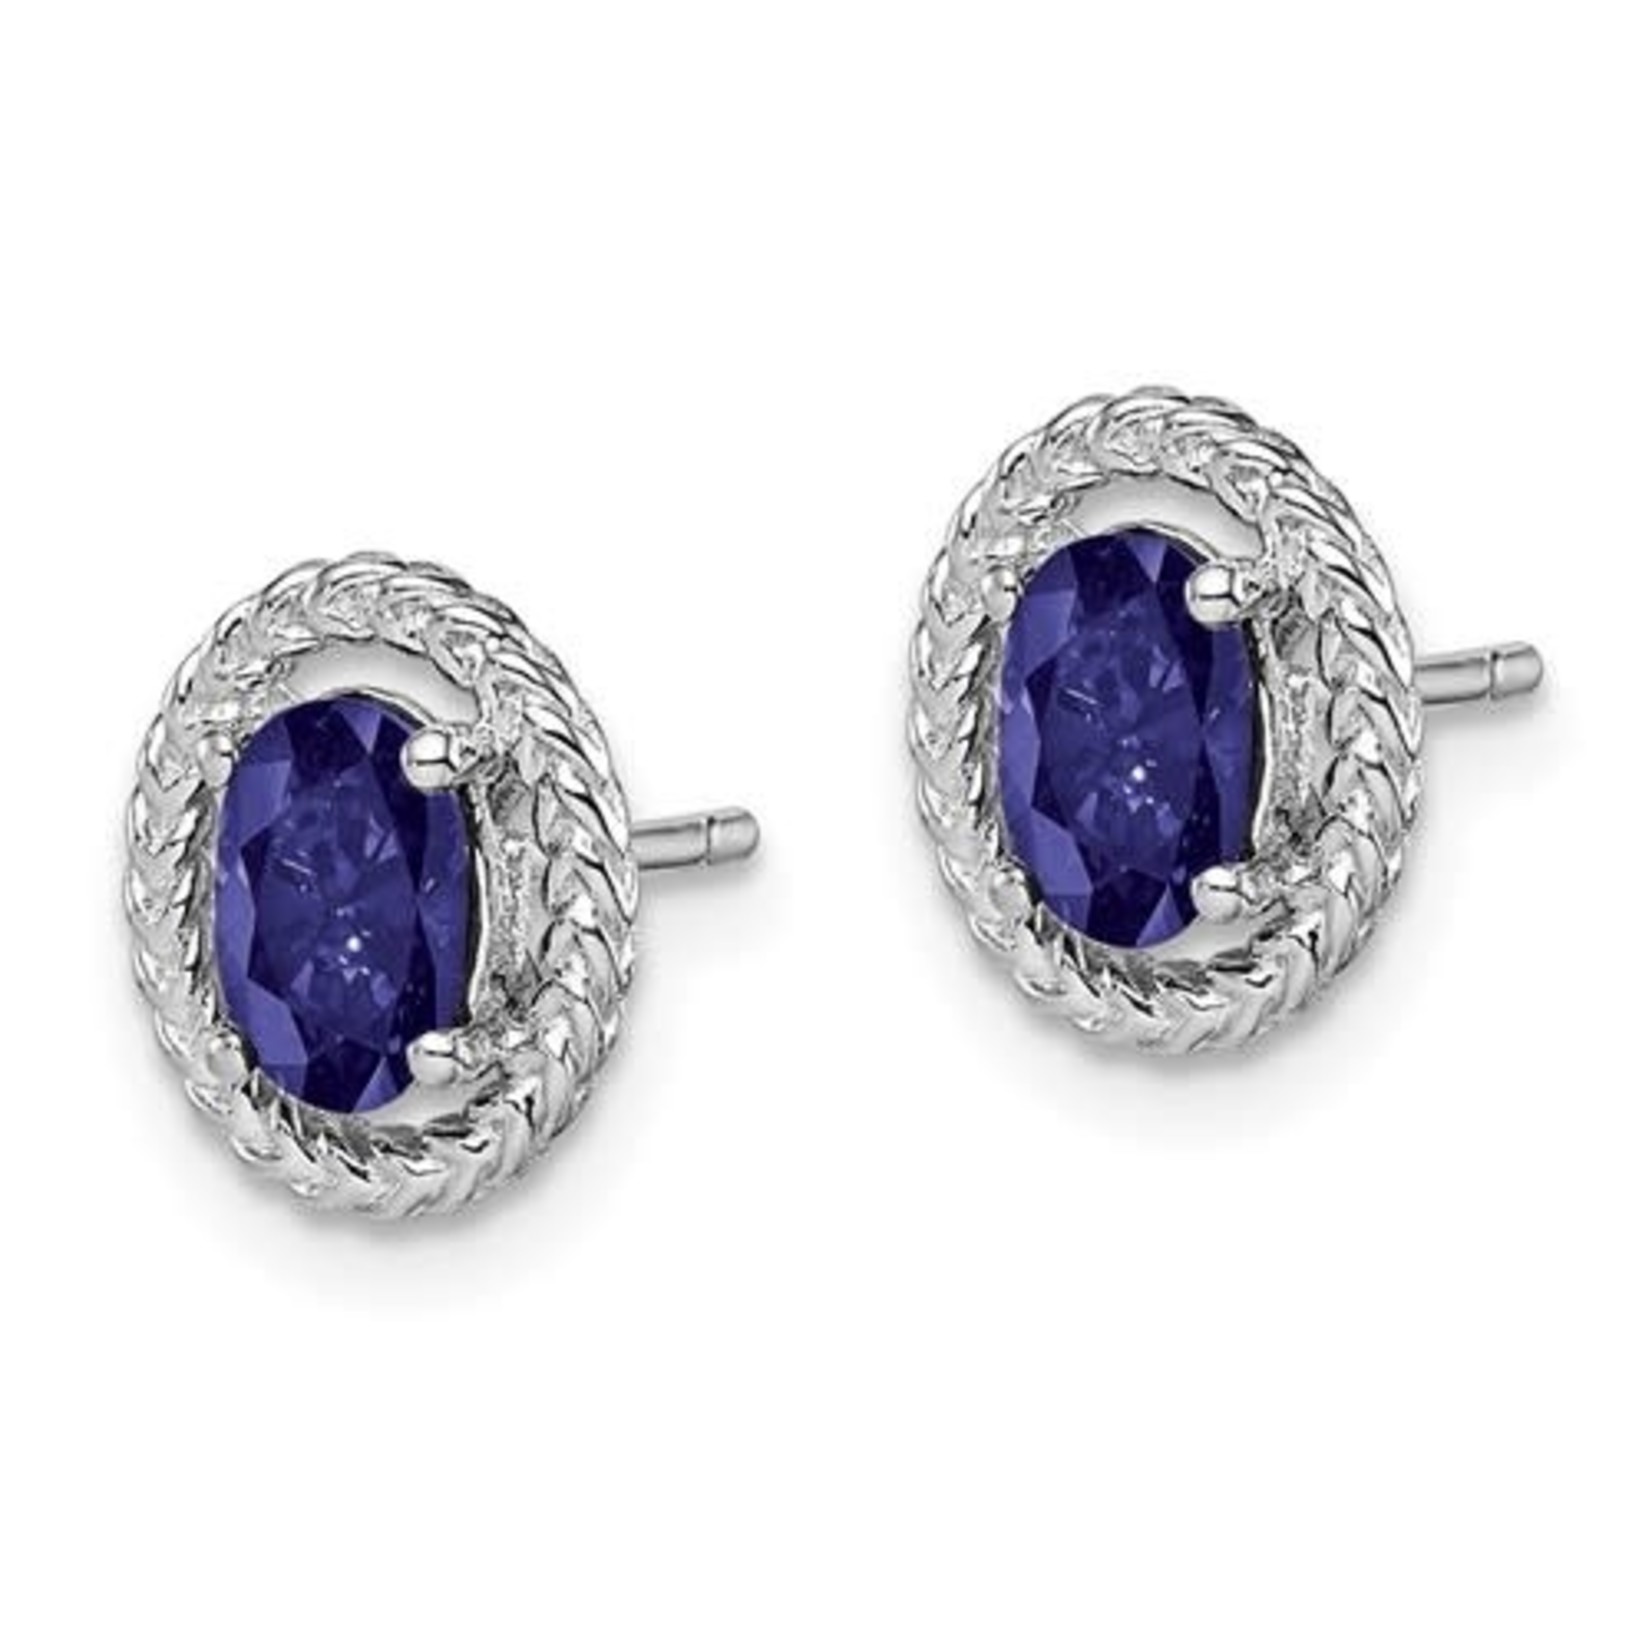 QUALITY GOLD OF CINCINNATI INC Sterling Silver Rhodium Plated Oval Created Sapphire Earrings